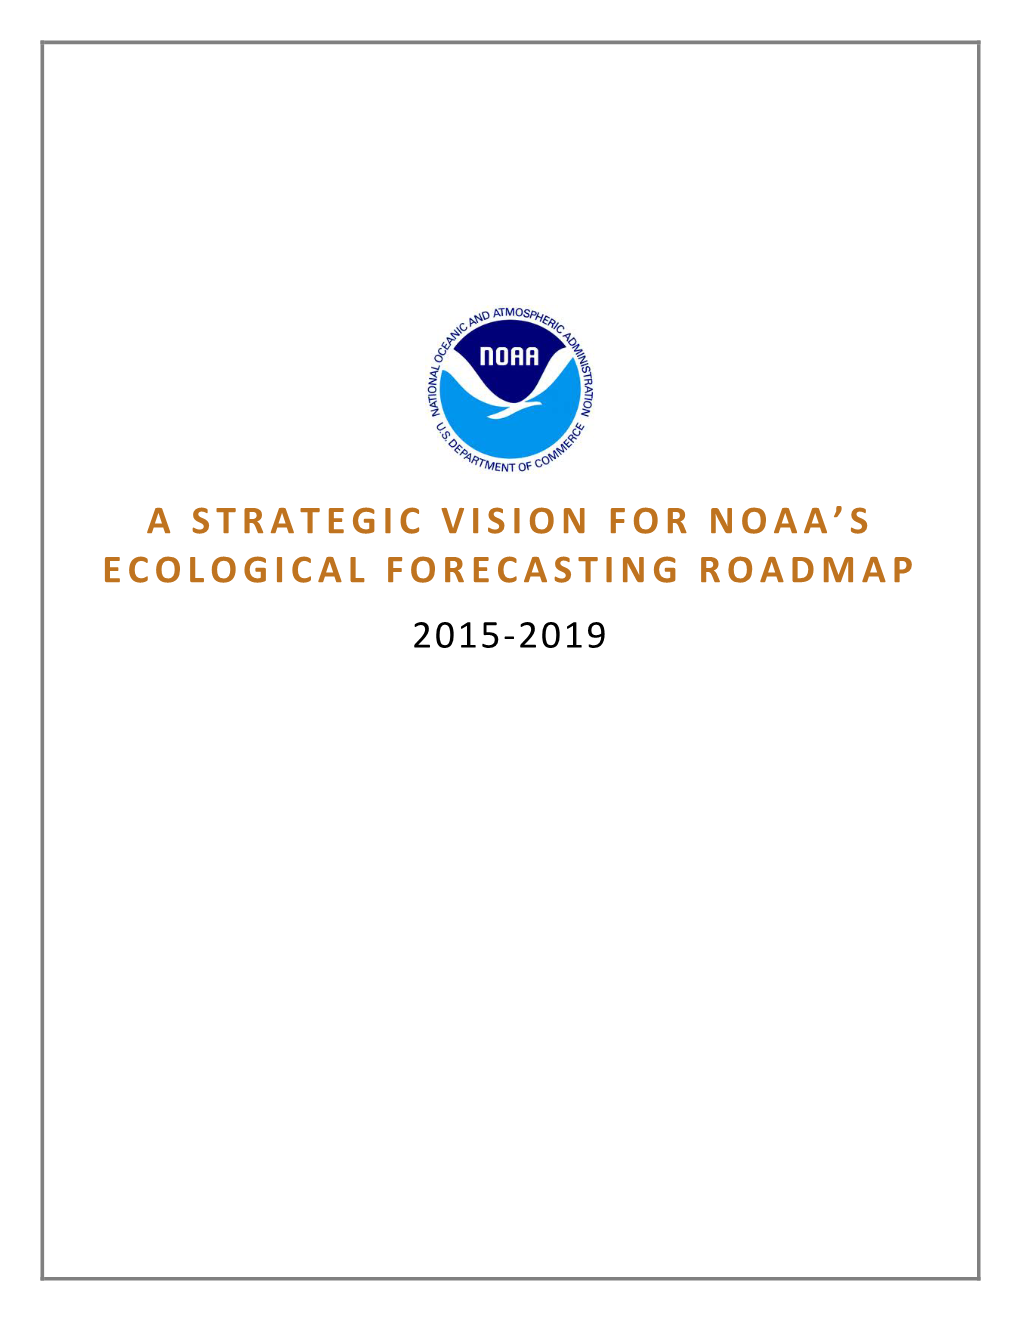 A Strategic Vision for NOAA's Ecological Forecasting Roadmap